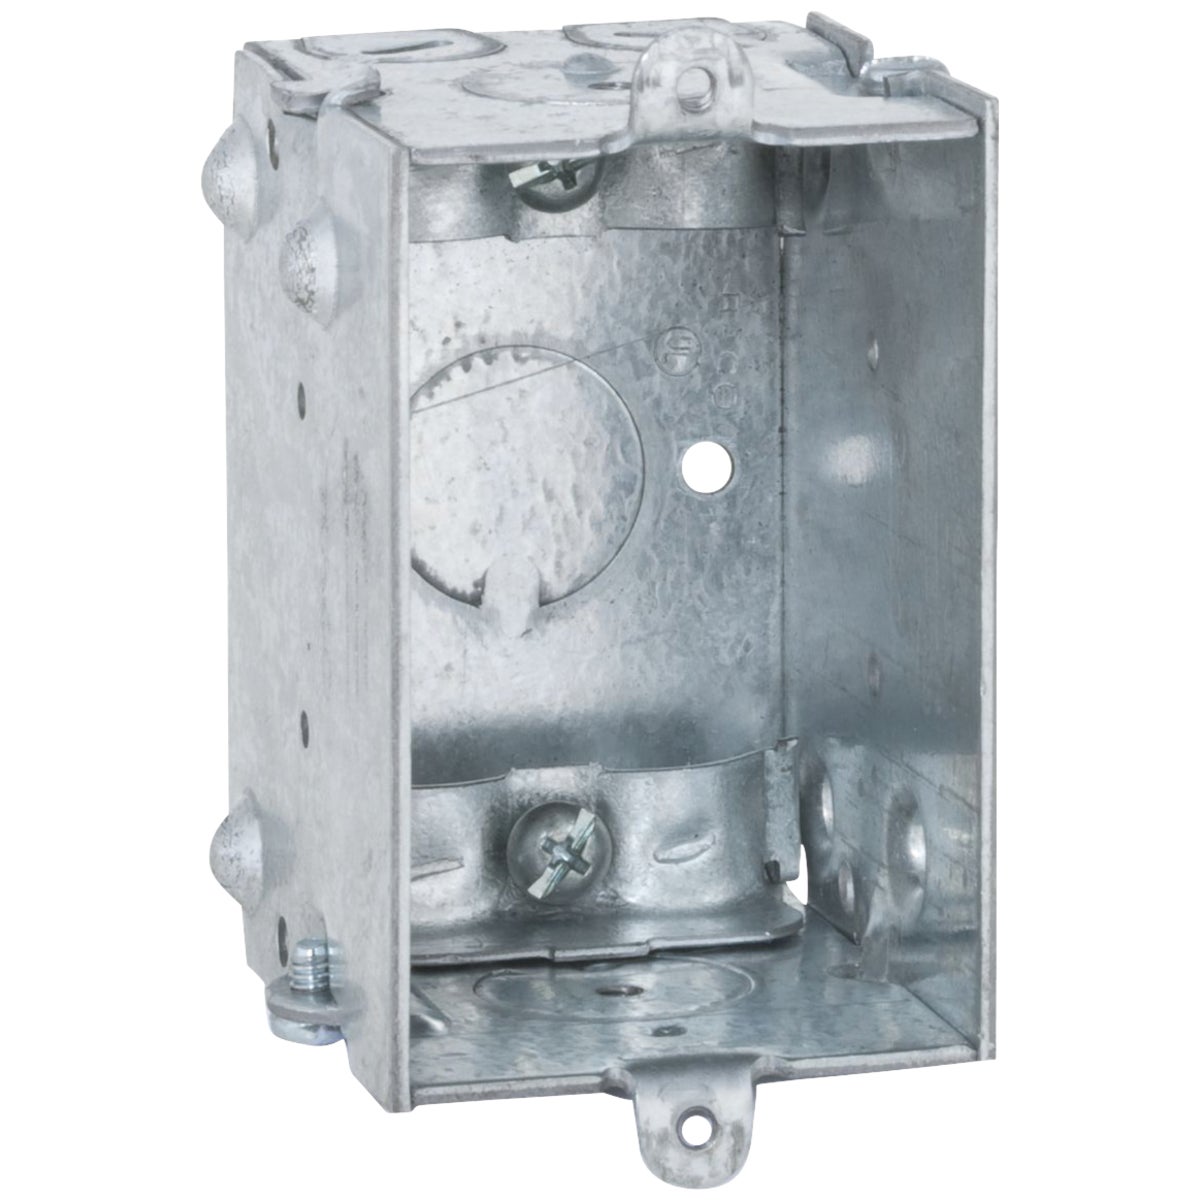 Item 507730, Durable welded steel electrical wall box.